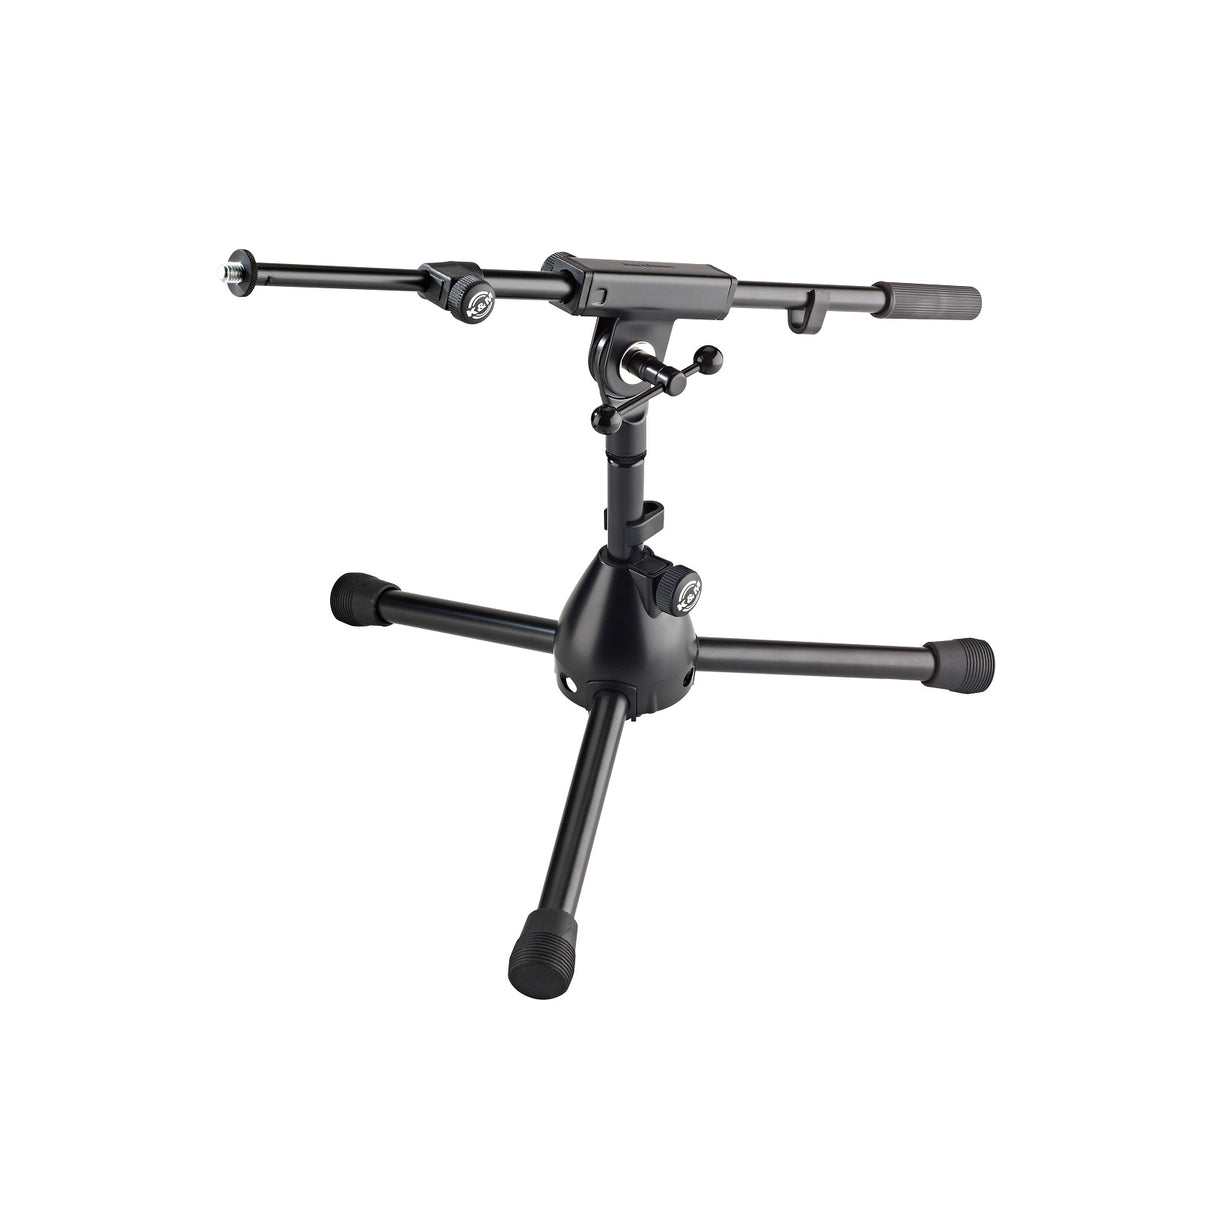 K&M 25950 Microphone Stand